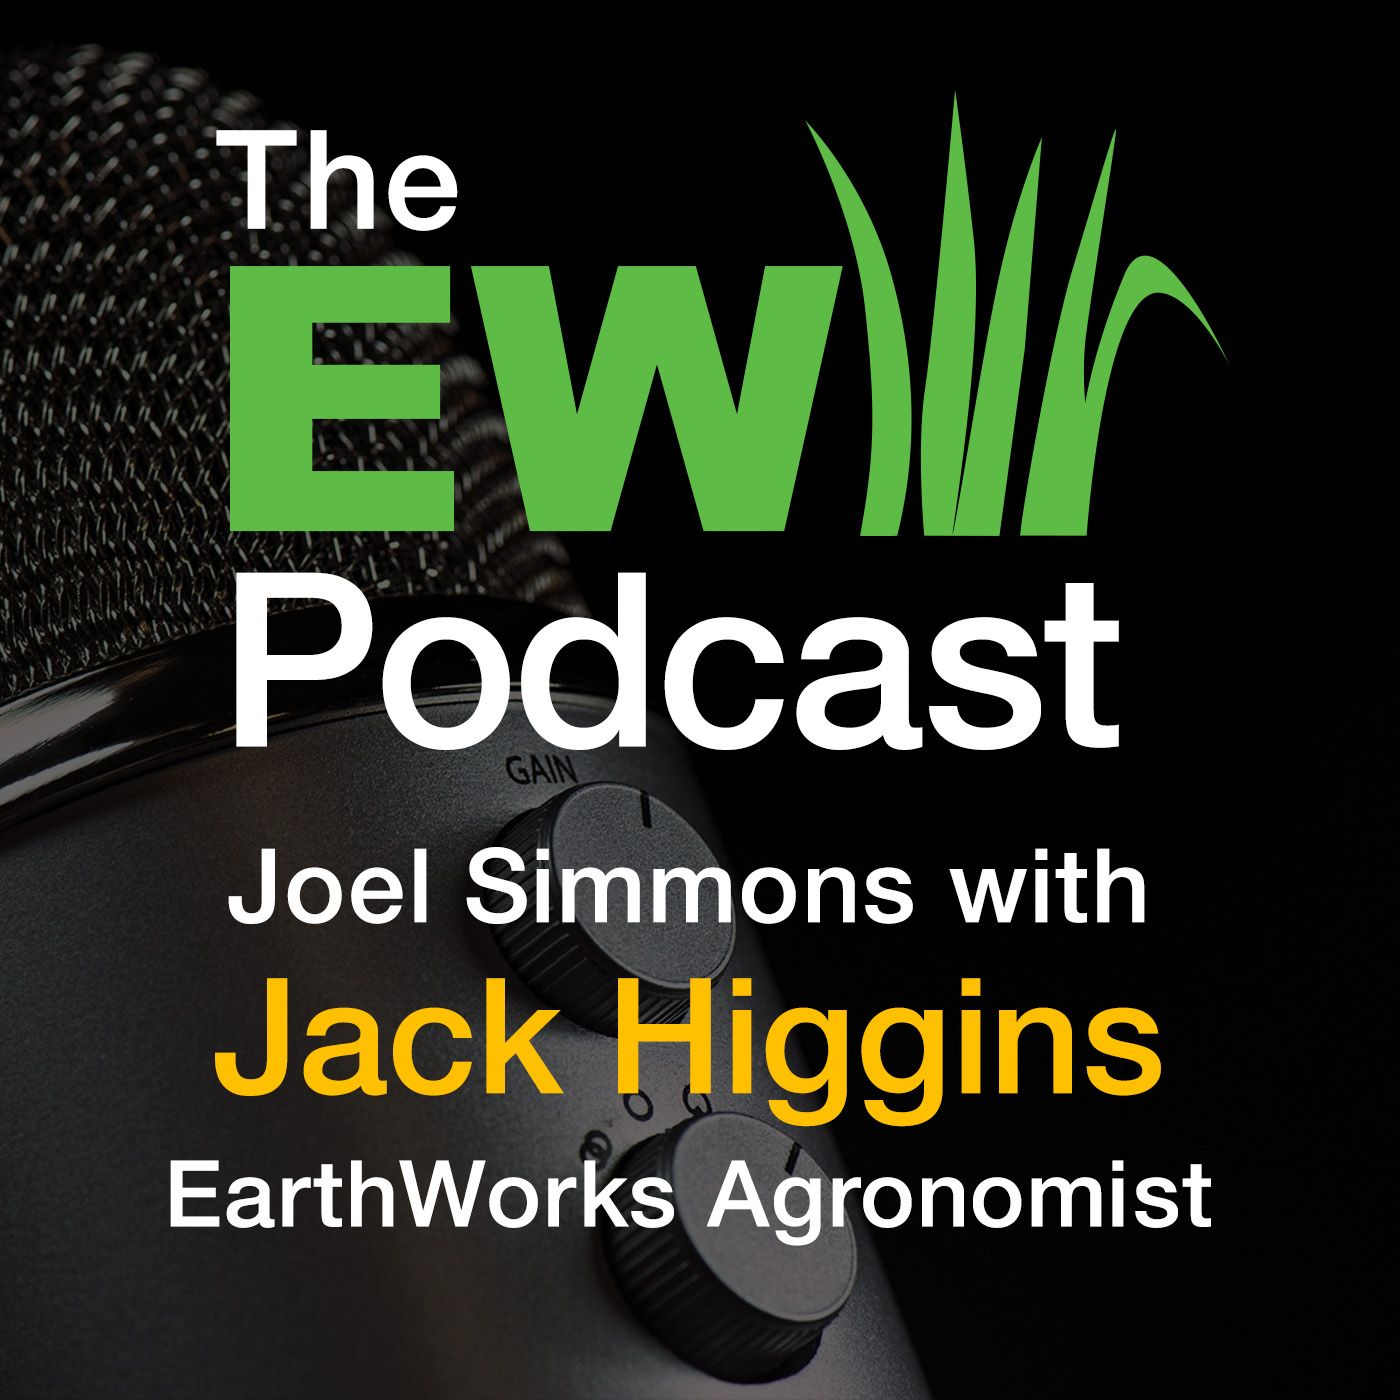 The EW Podcast - Joel Simmons with Jack Higgins